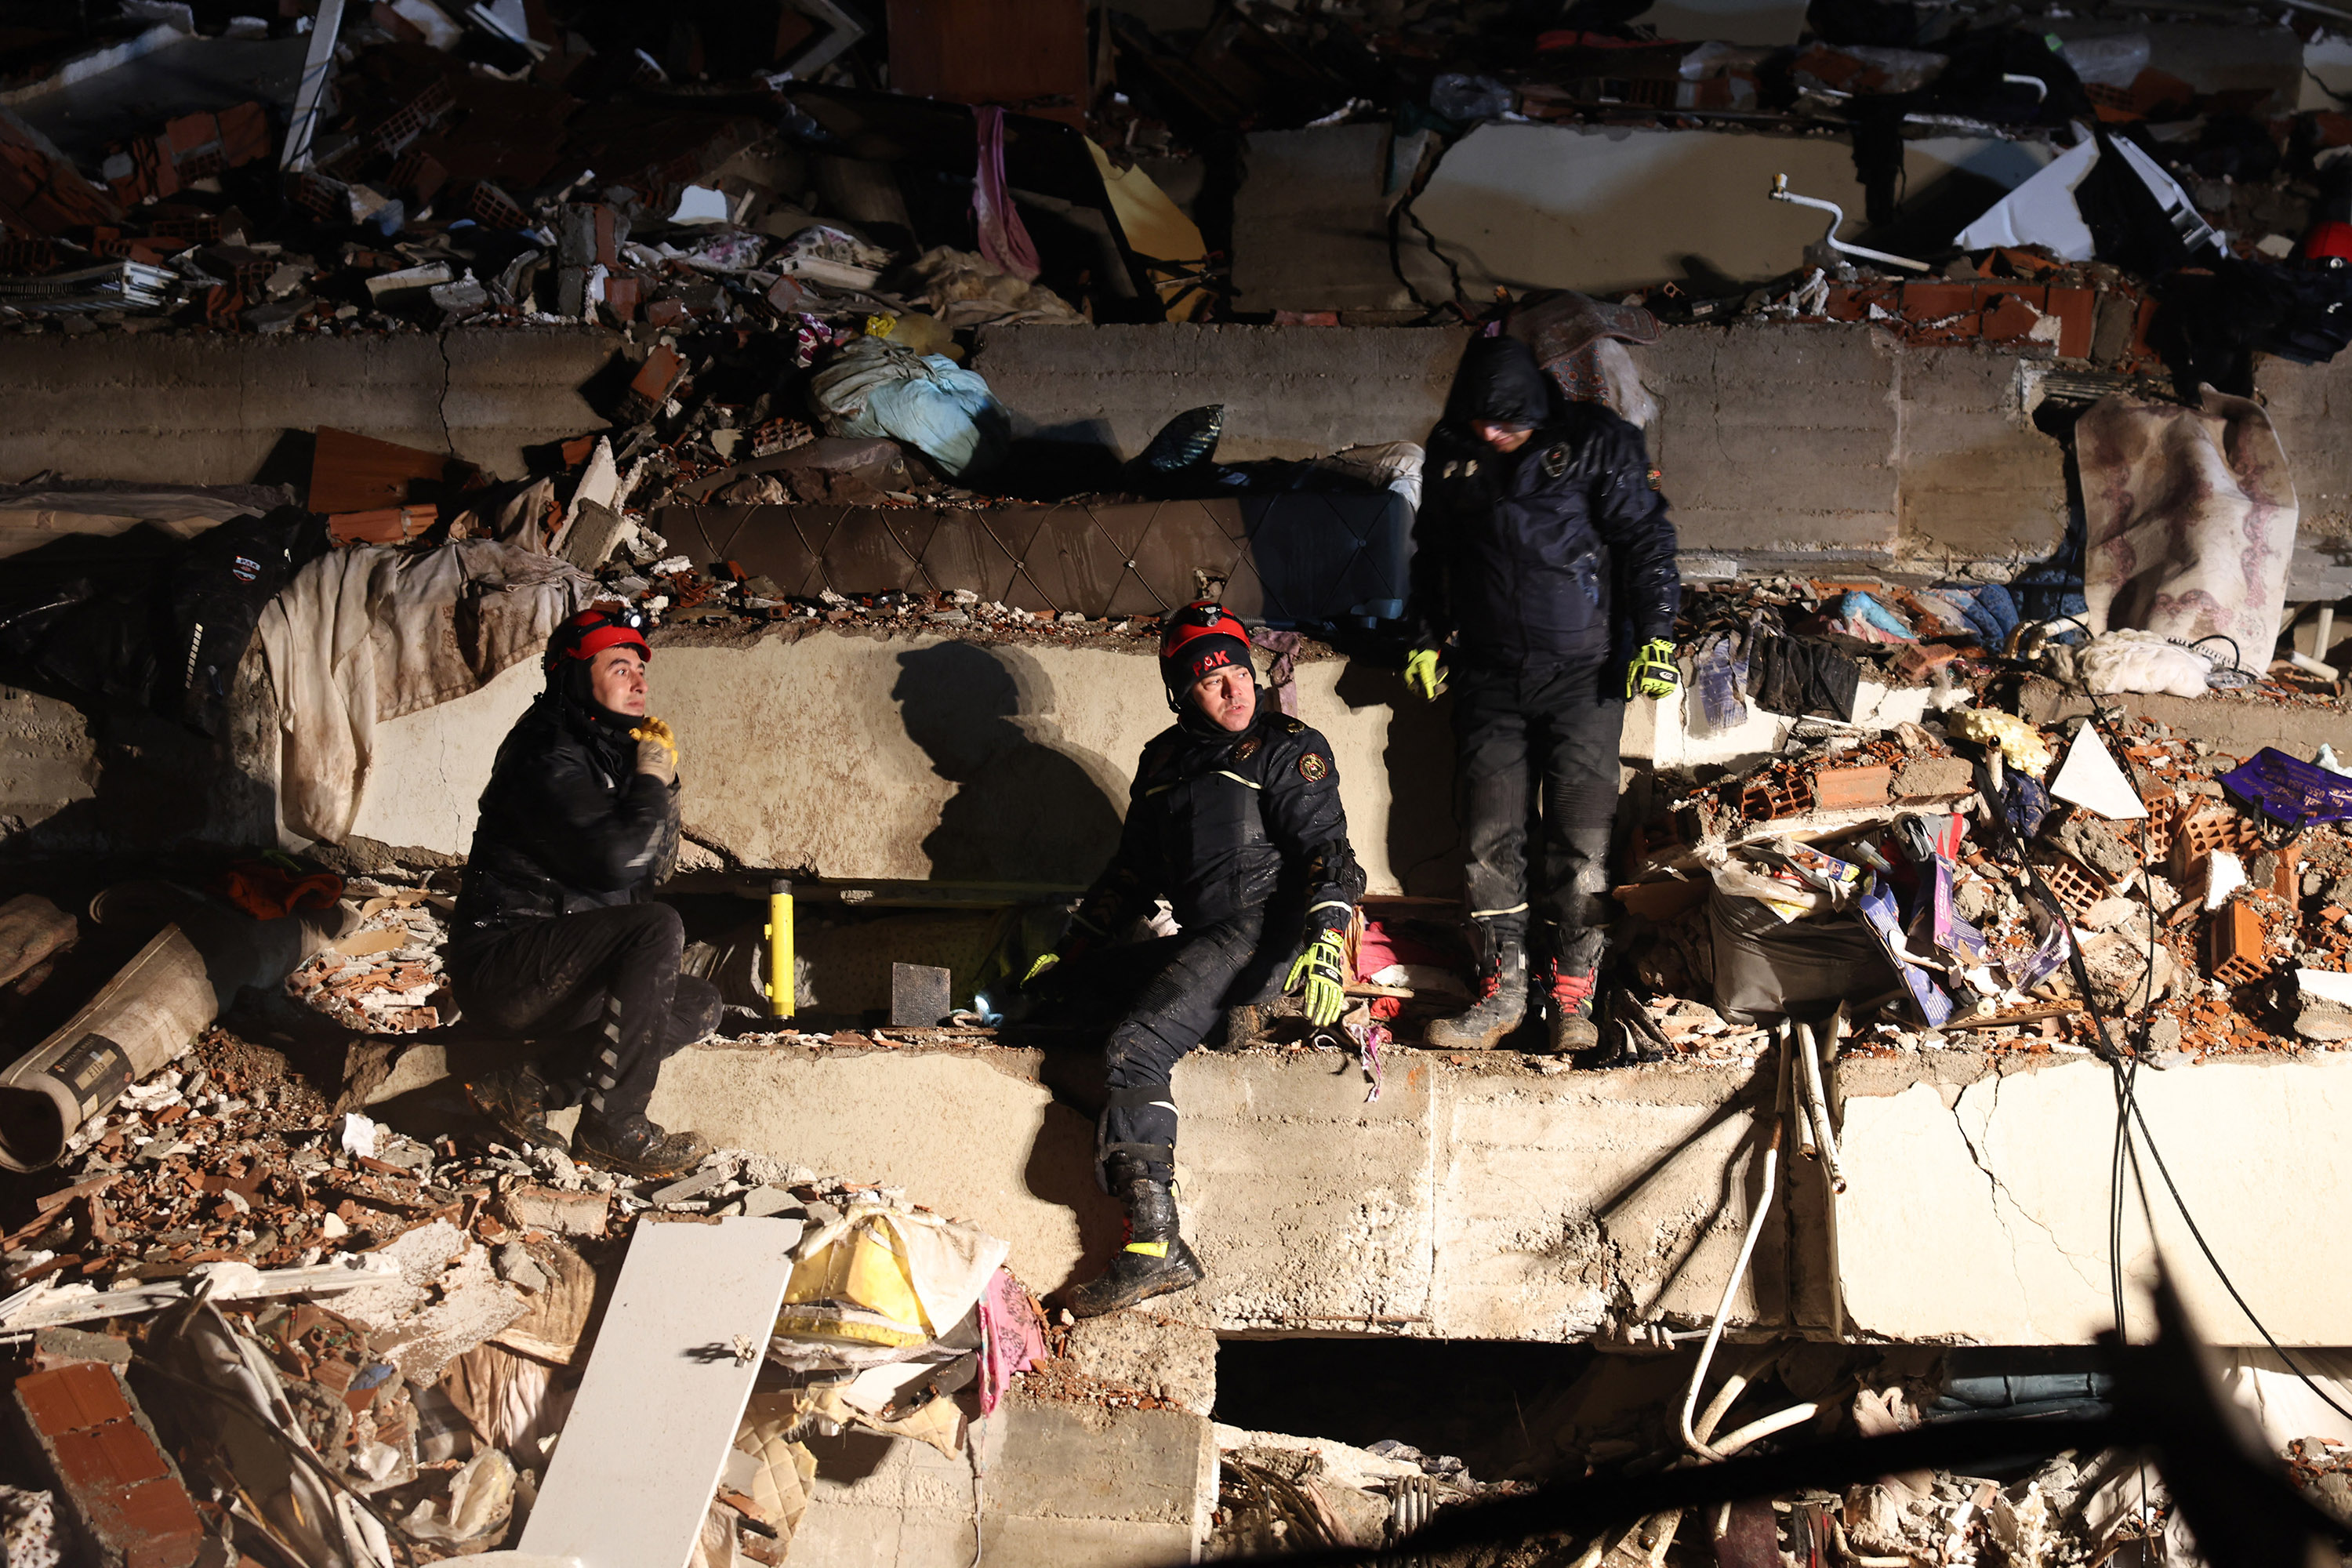 Rescuers search for victims and survivors amidst the rubble of collapsed buildings in Kahramanmaras, Turkey, on February 7.